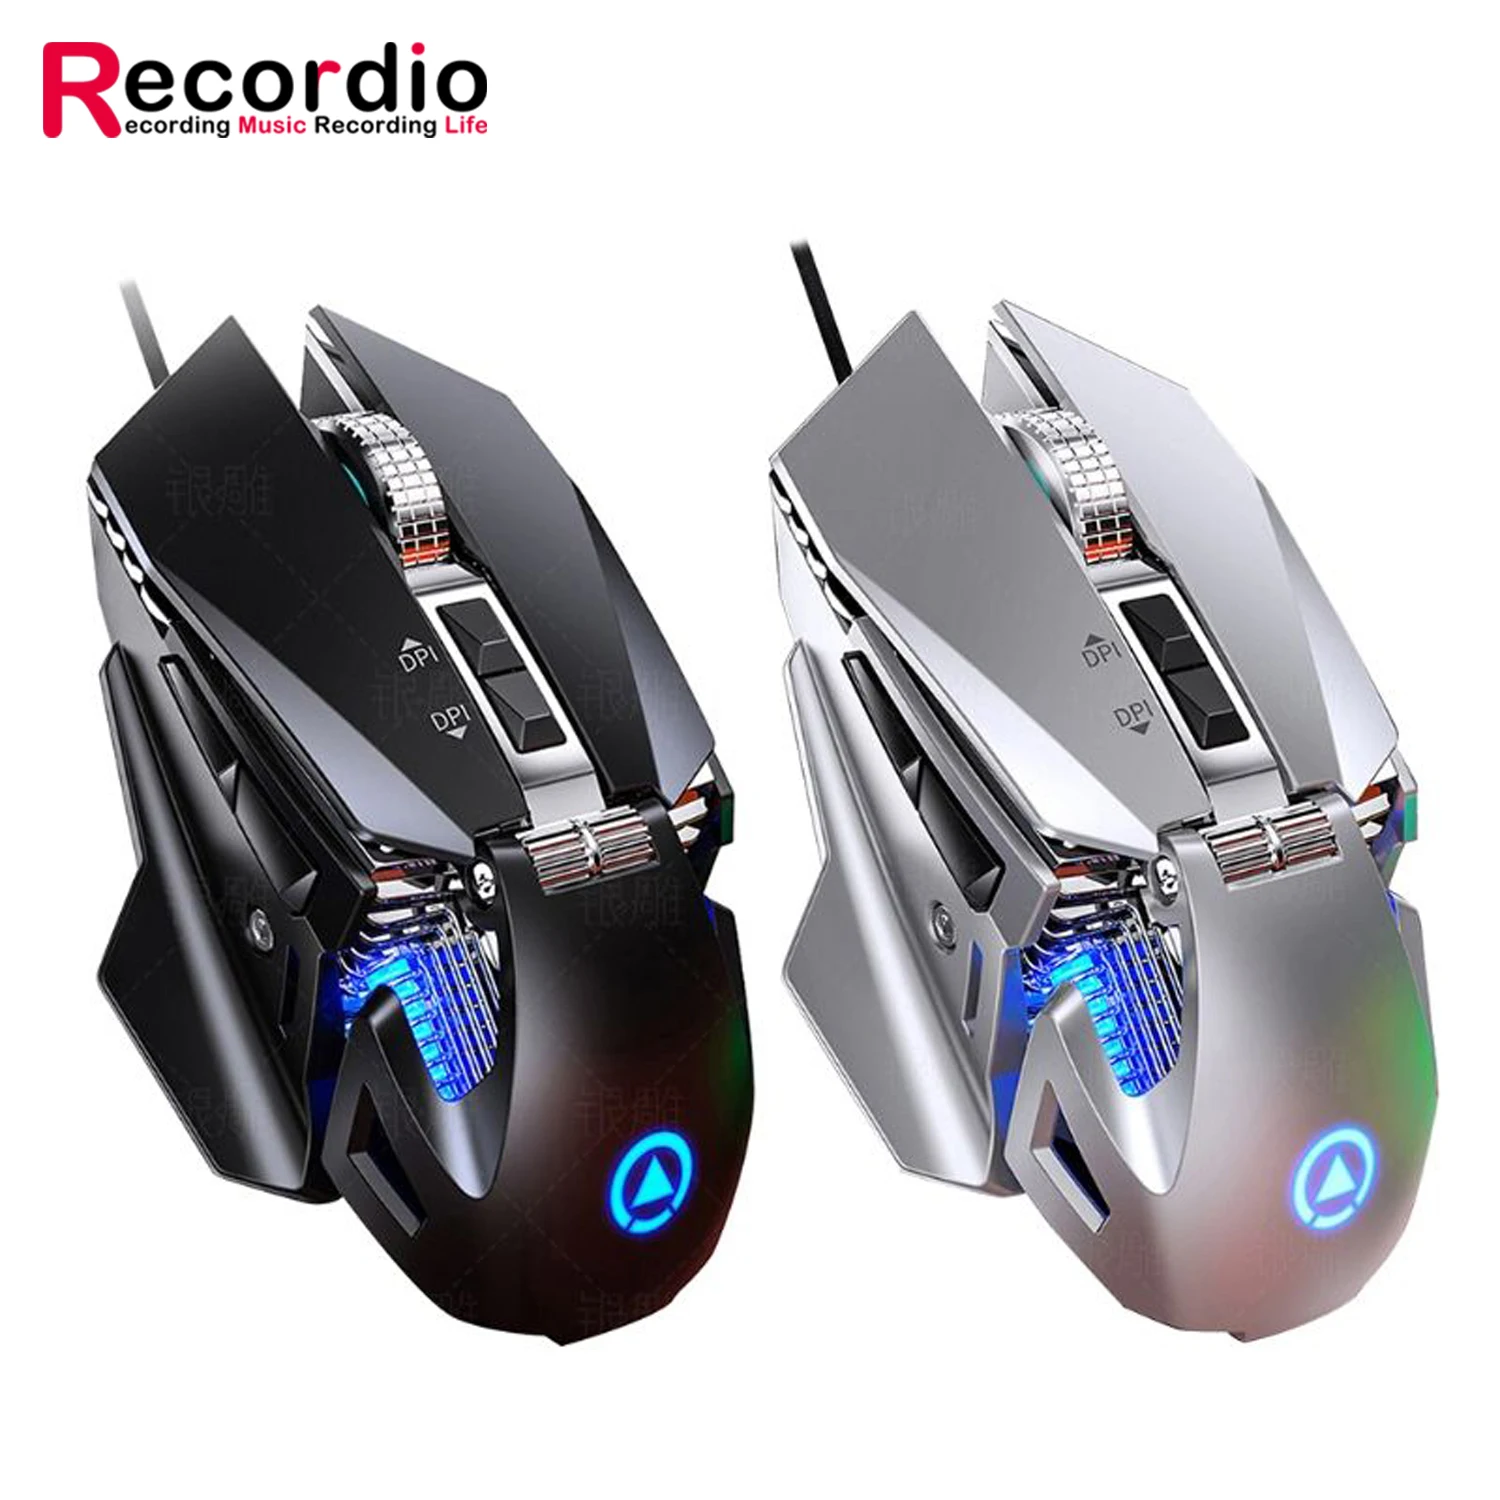 

GAZ-M14 7 Color Illuminated USB Wired Mouse Gamer 7200DPI Mechanical RGB Gaming Mouse